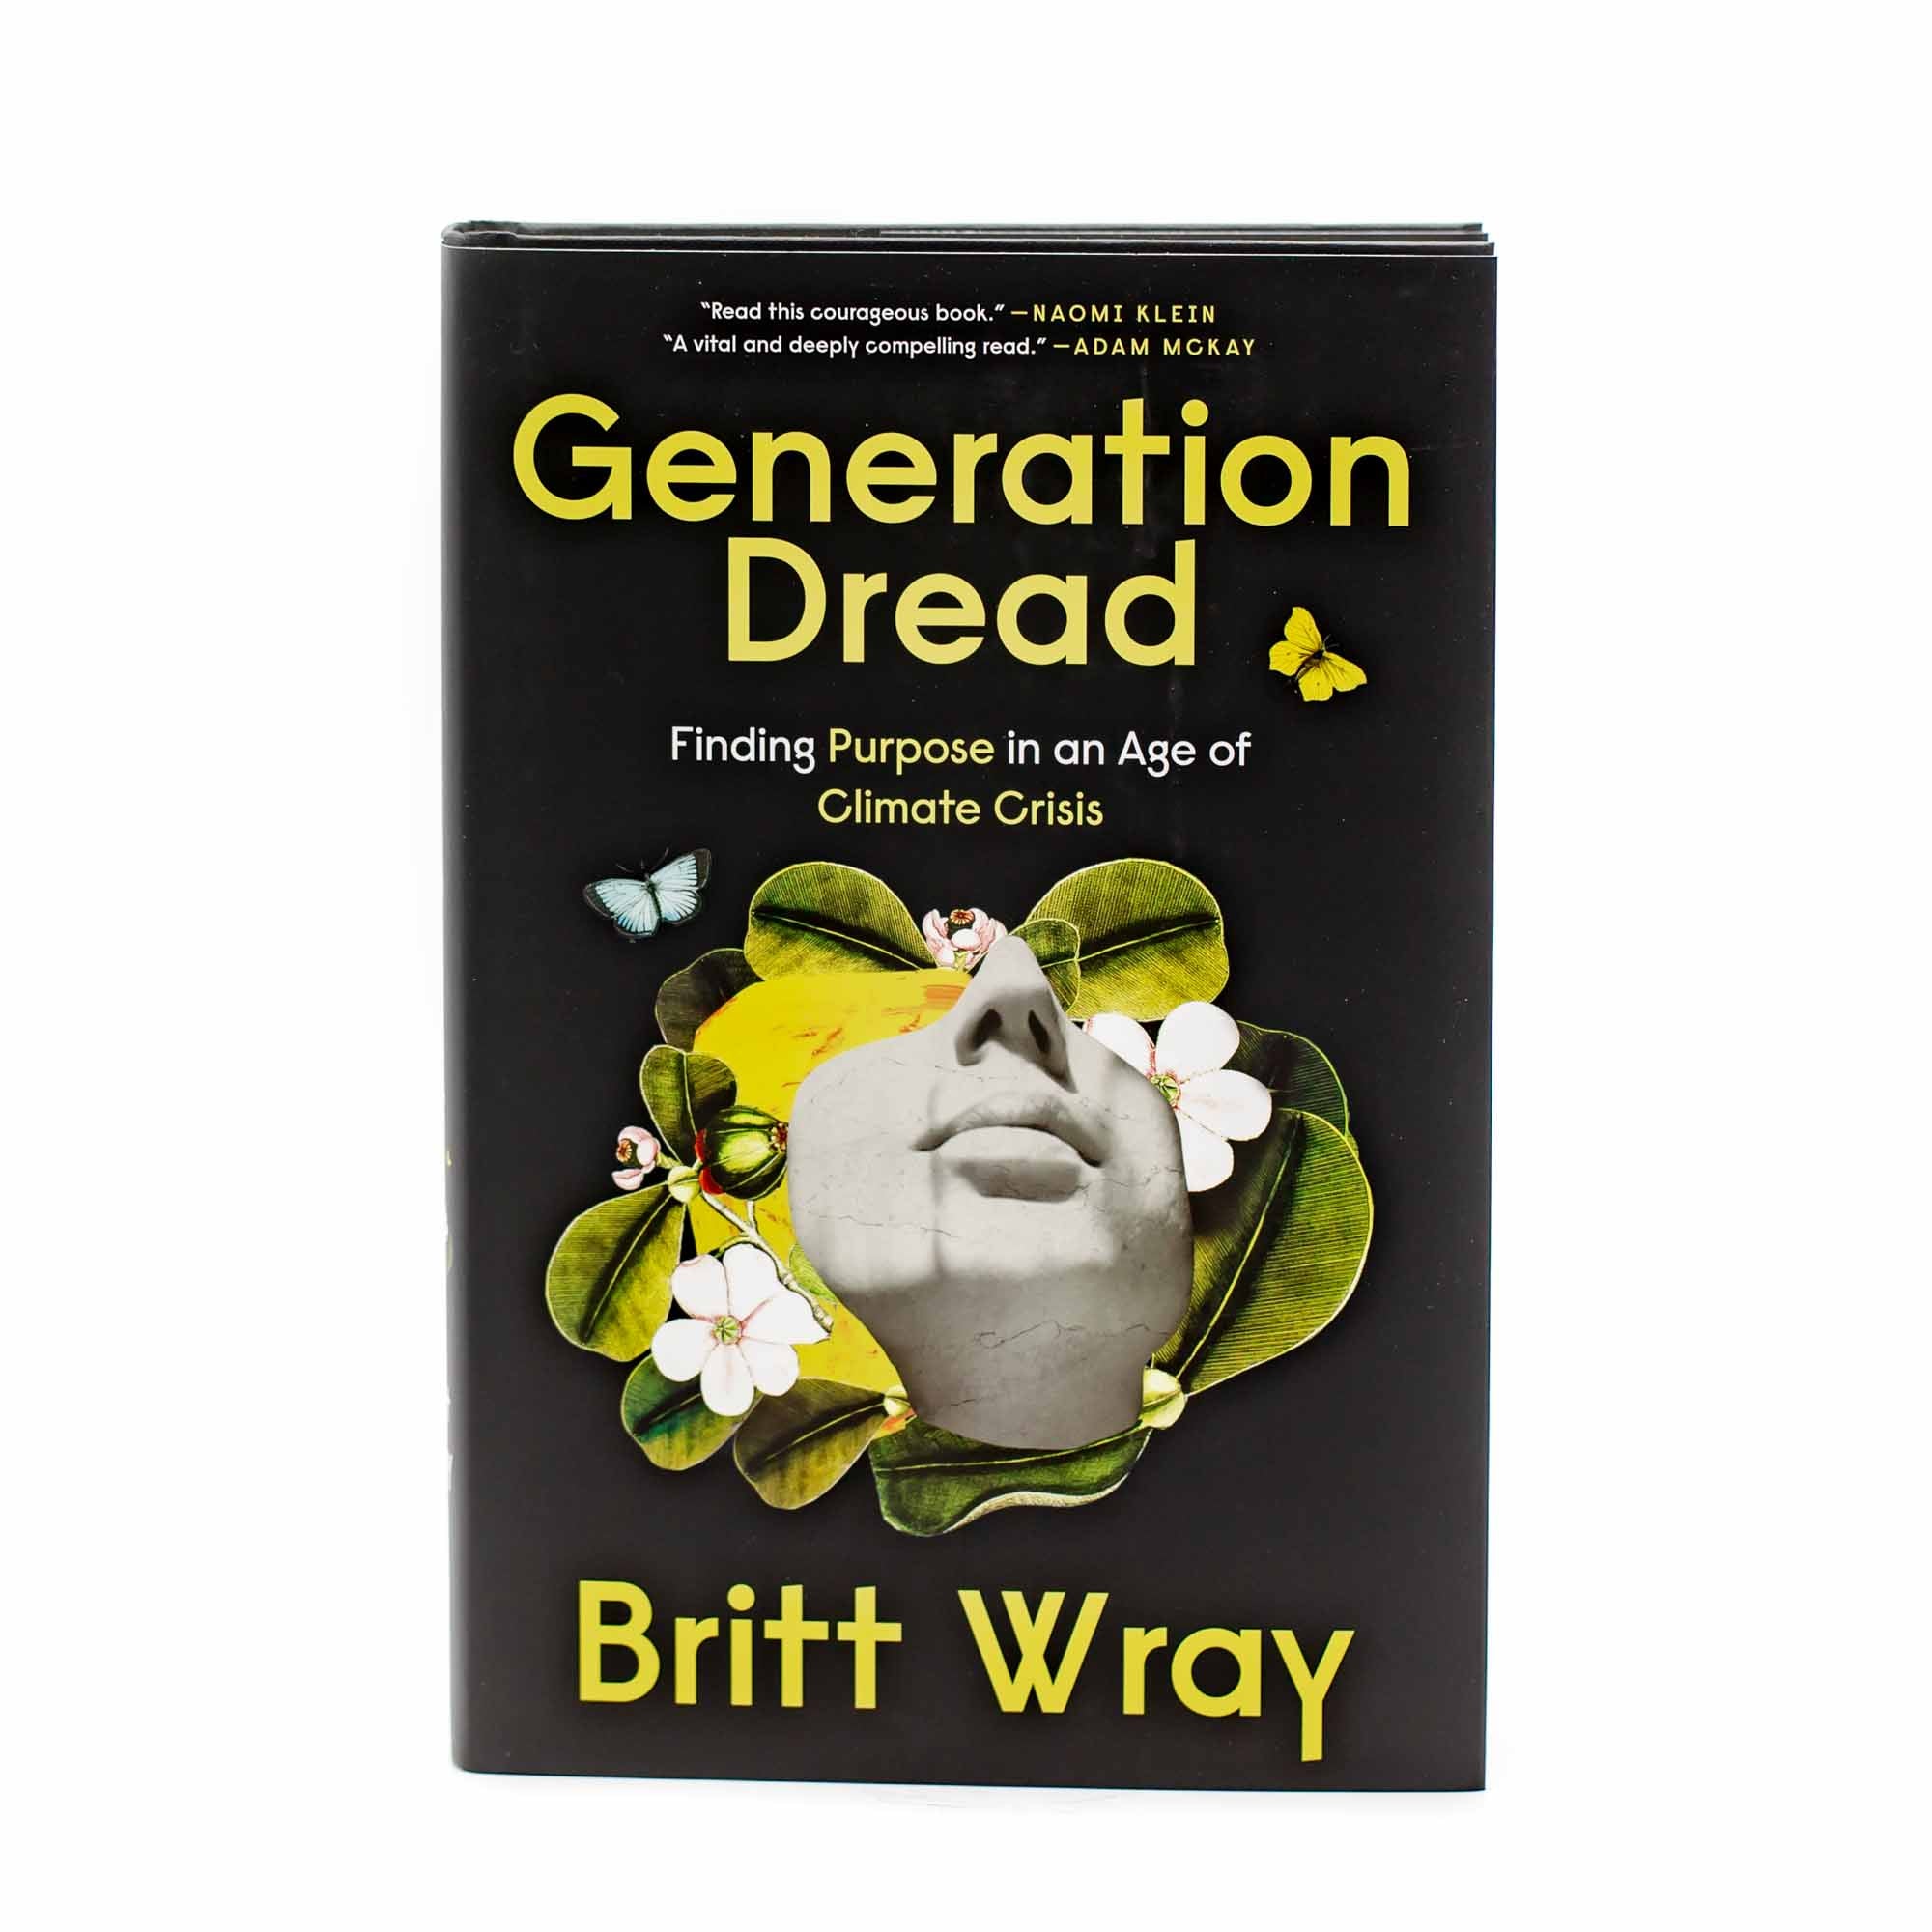 Generation Dread by Britt Wray - Mortise And Tenon